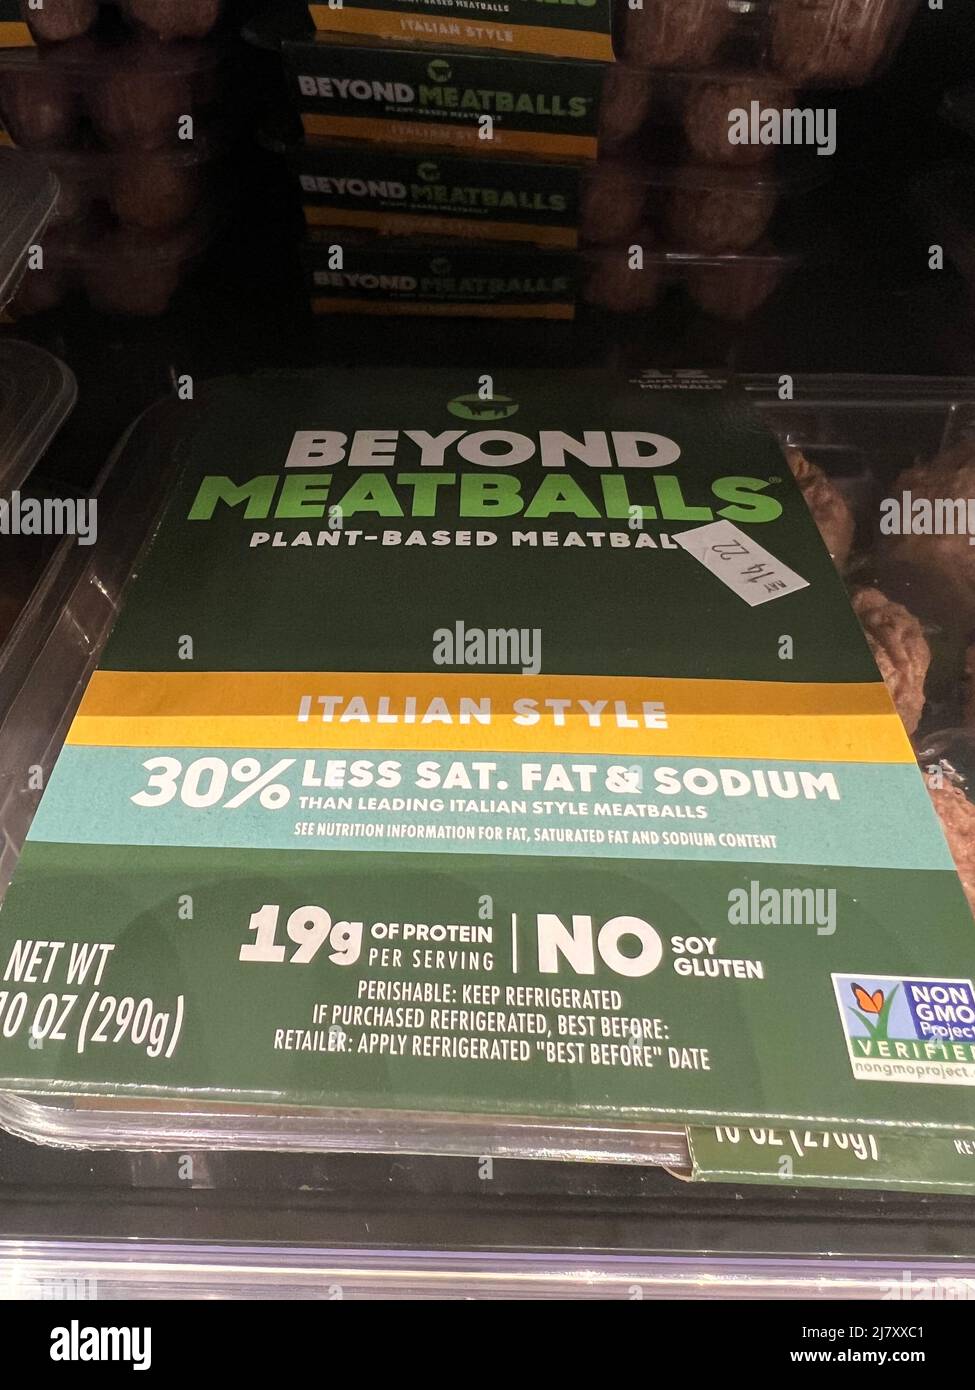 Beyond Meatballs, plant-based meatballs, with new packaging on the refrigerator shelf at a grocery store. Stock Photo